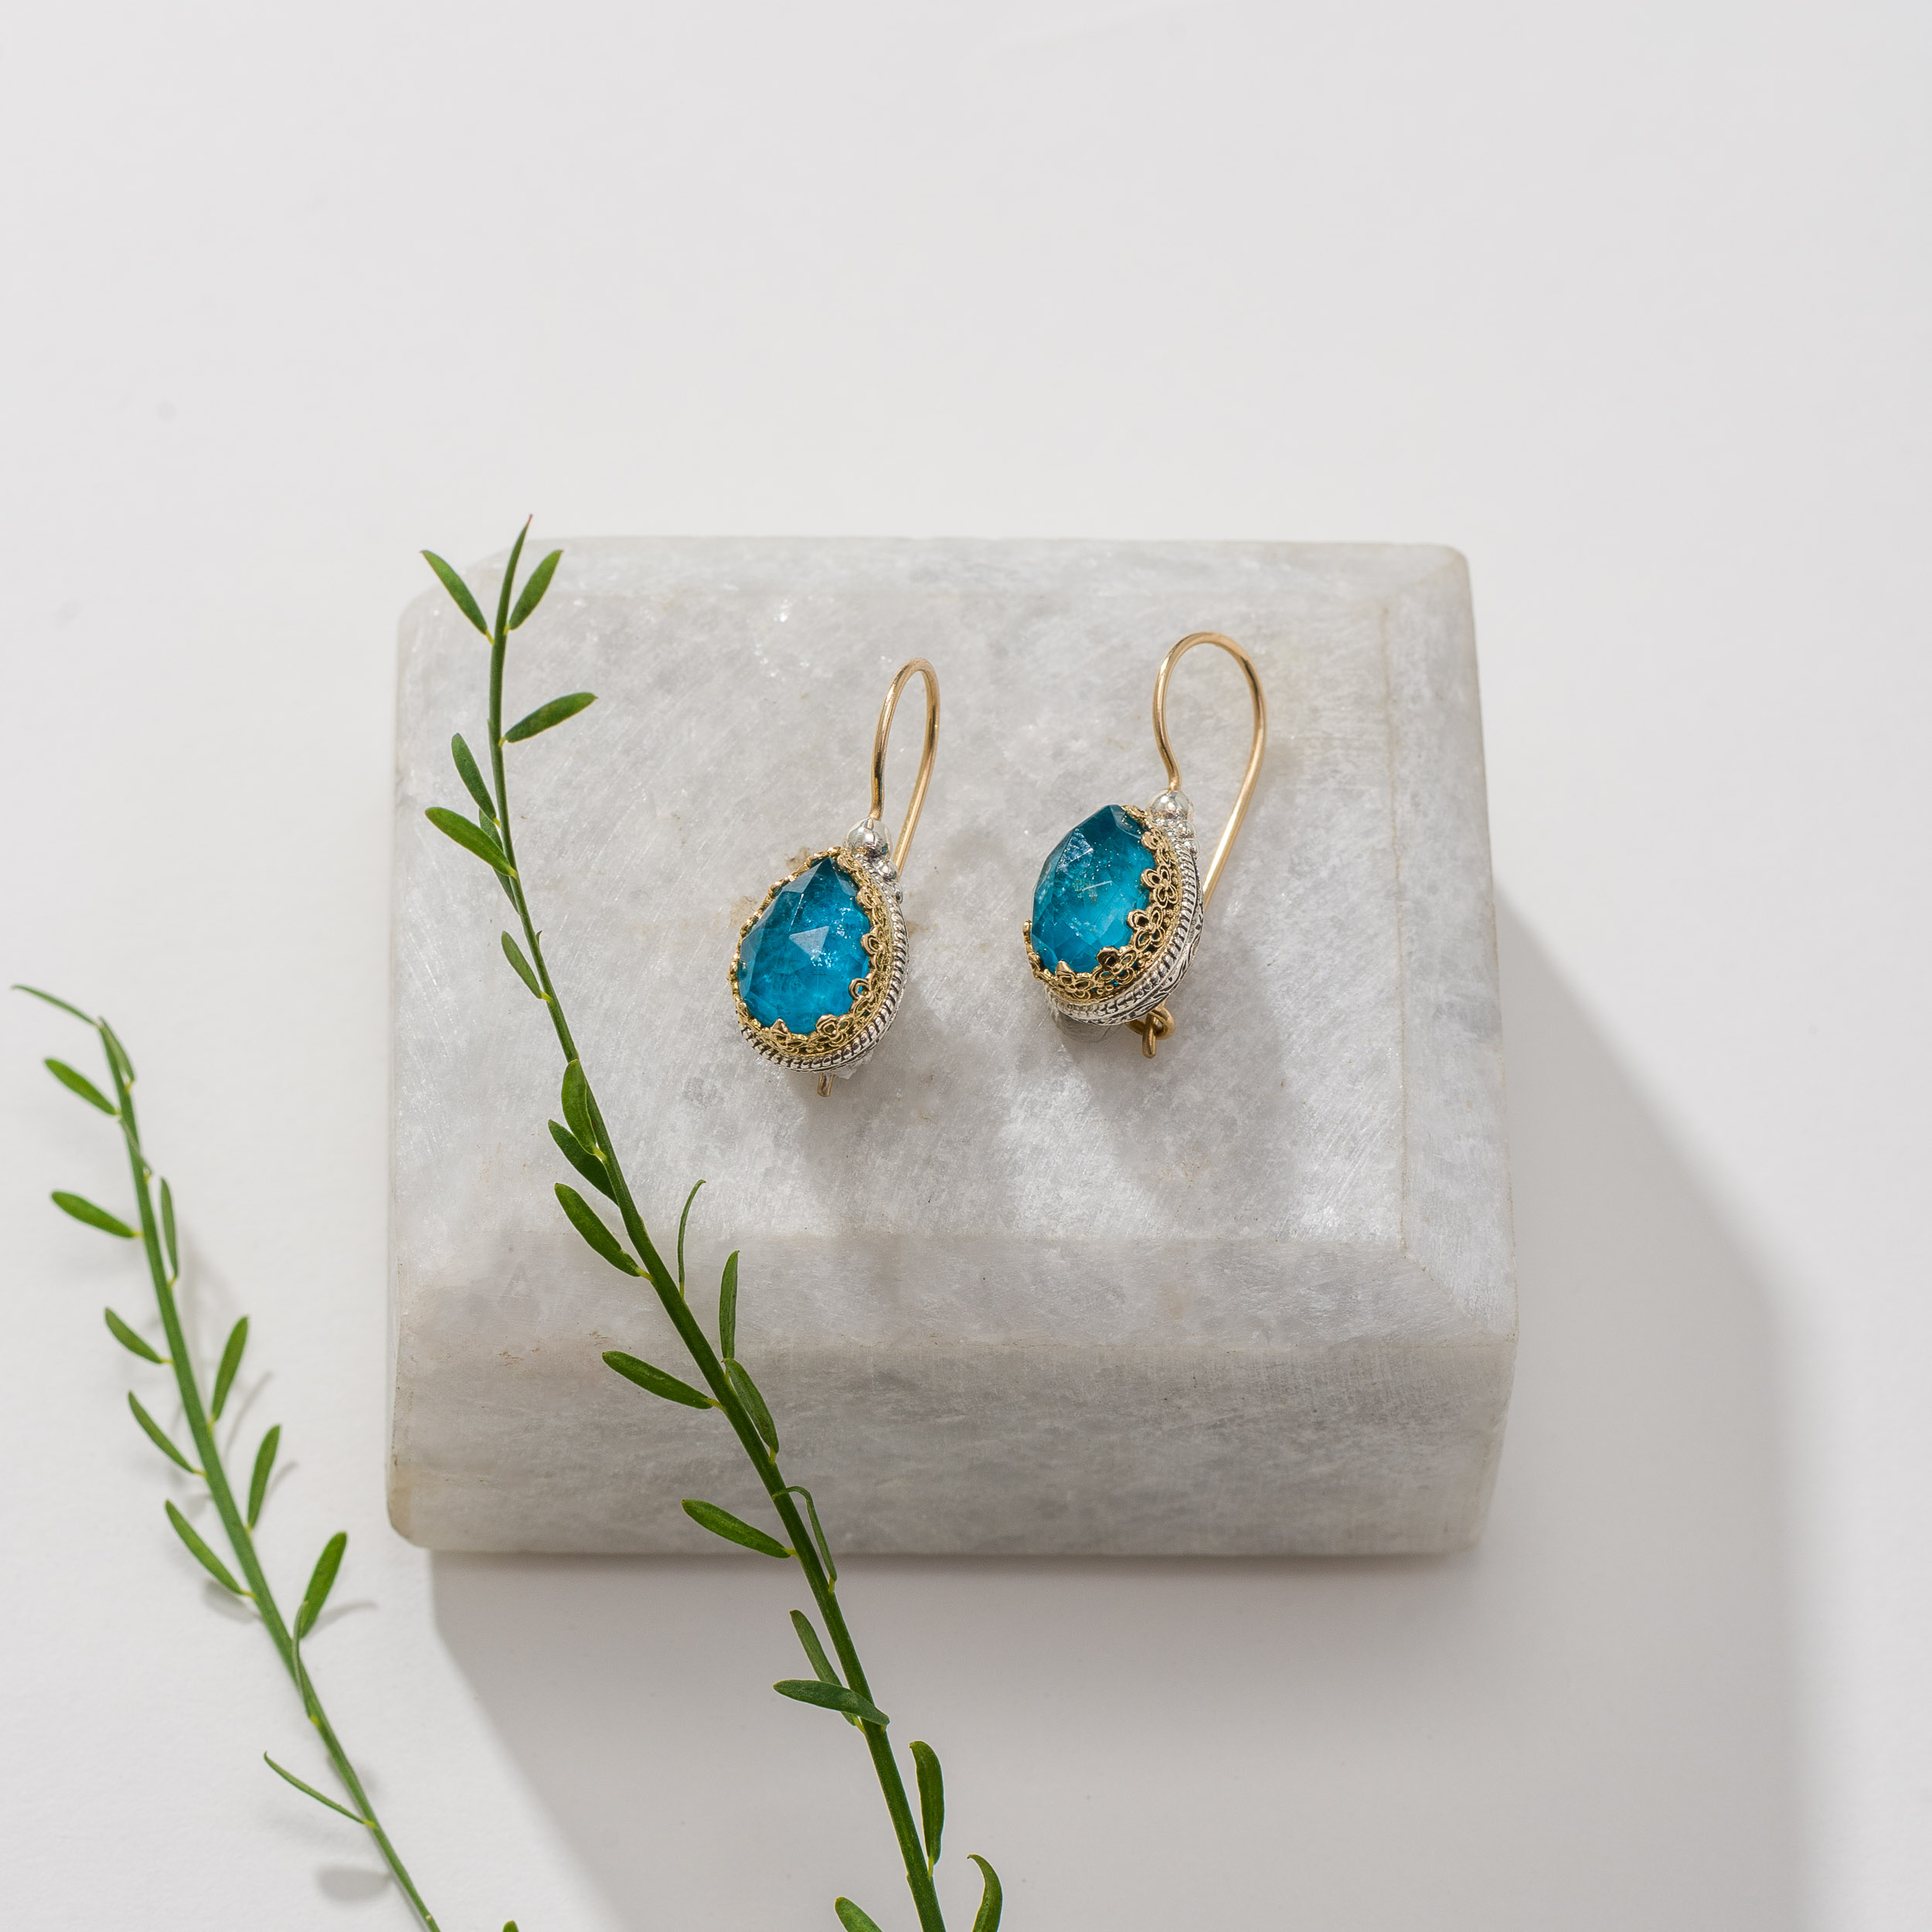 Aegean Colors small Drop Earrings in 18K Gold and Sterling Silver with Doublet Stones